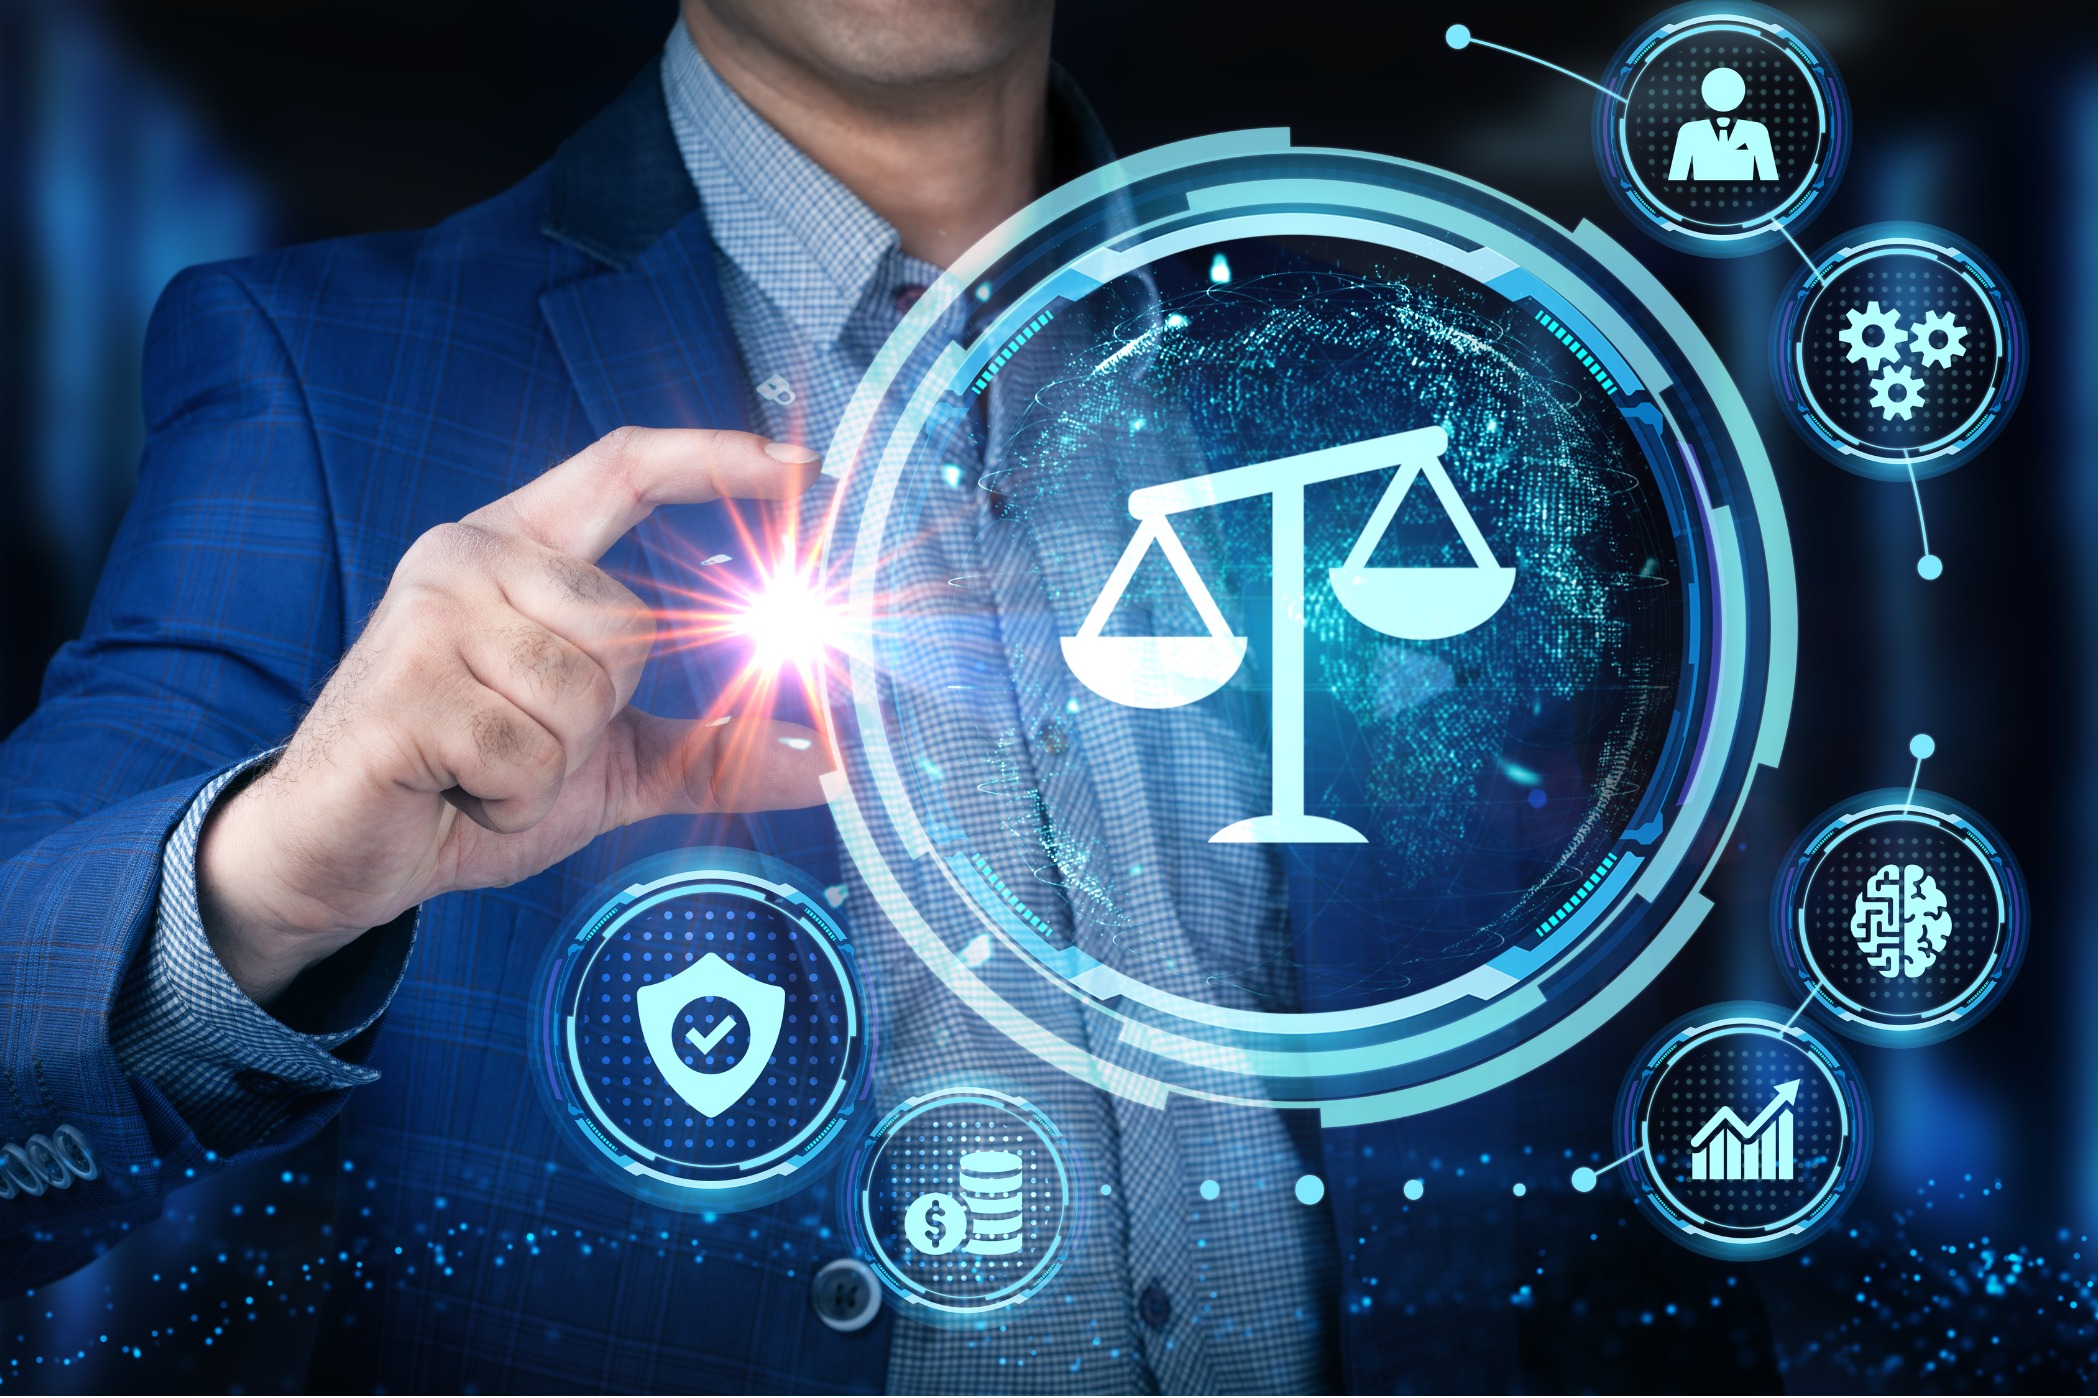 Modernizing Your Law Firm Through Technology